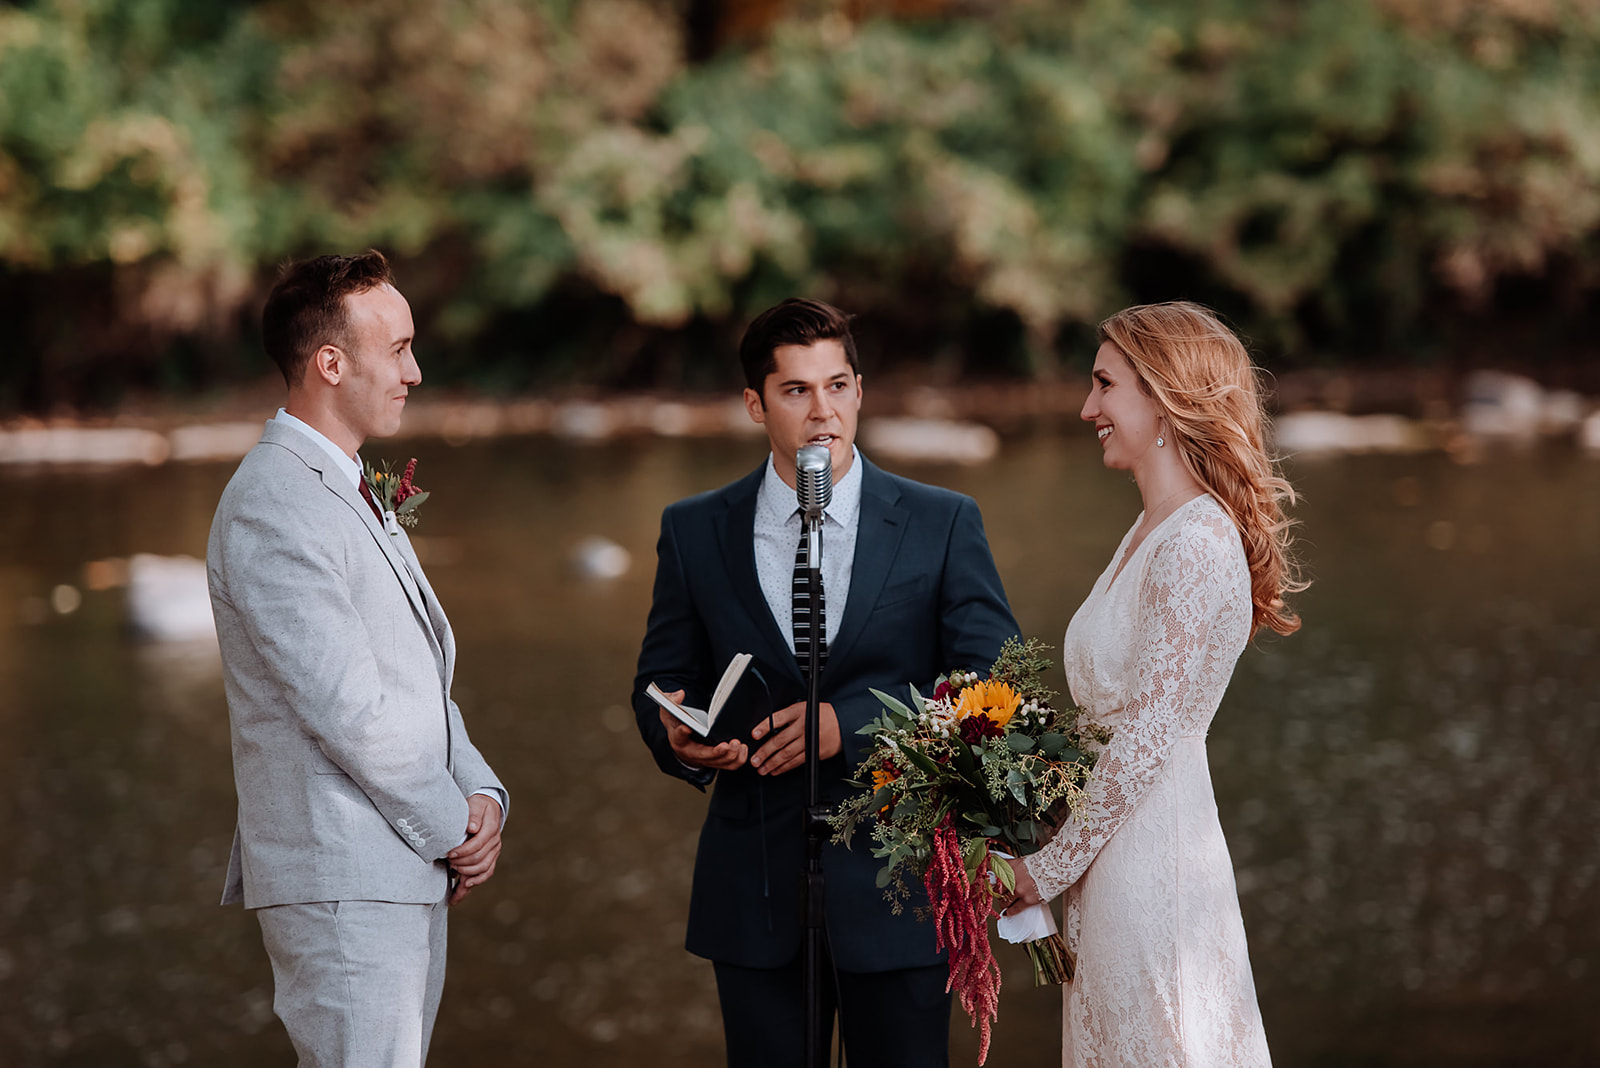 Couple's friend officiates their wedding ceremony along the rivers edge at Hudson Valley Barn wedding.